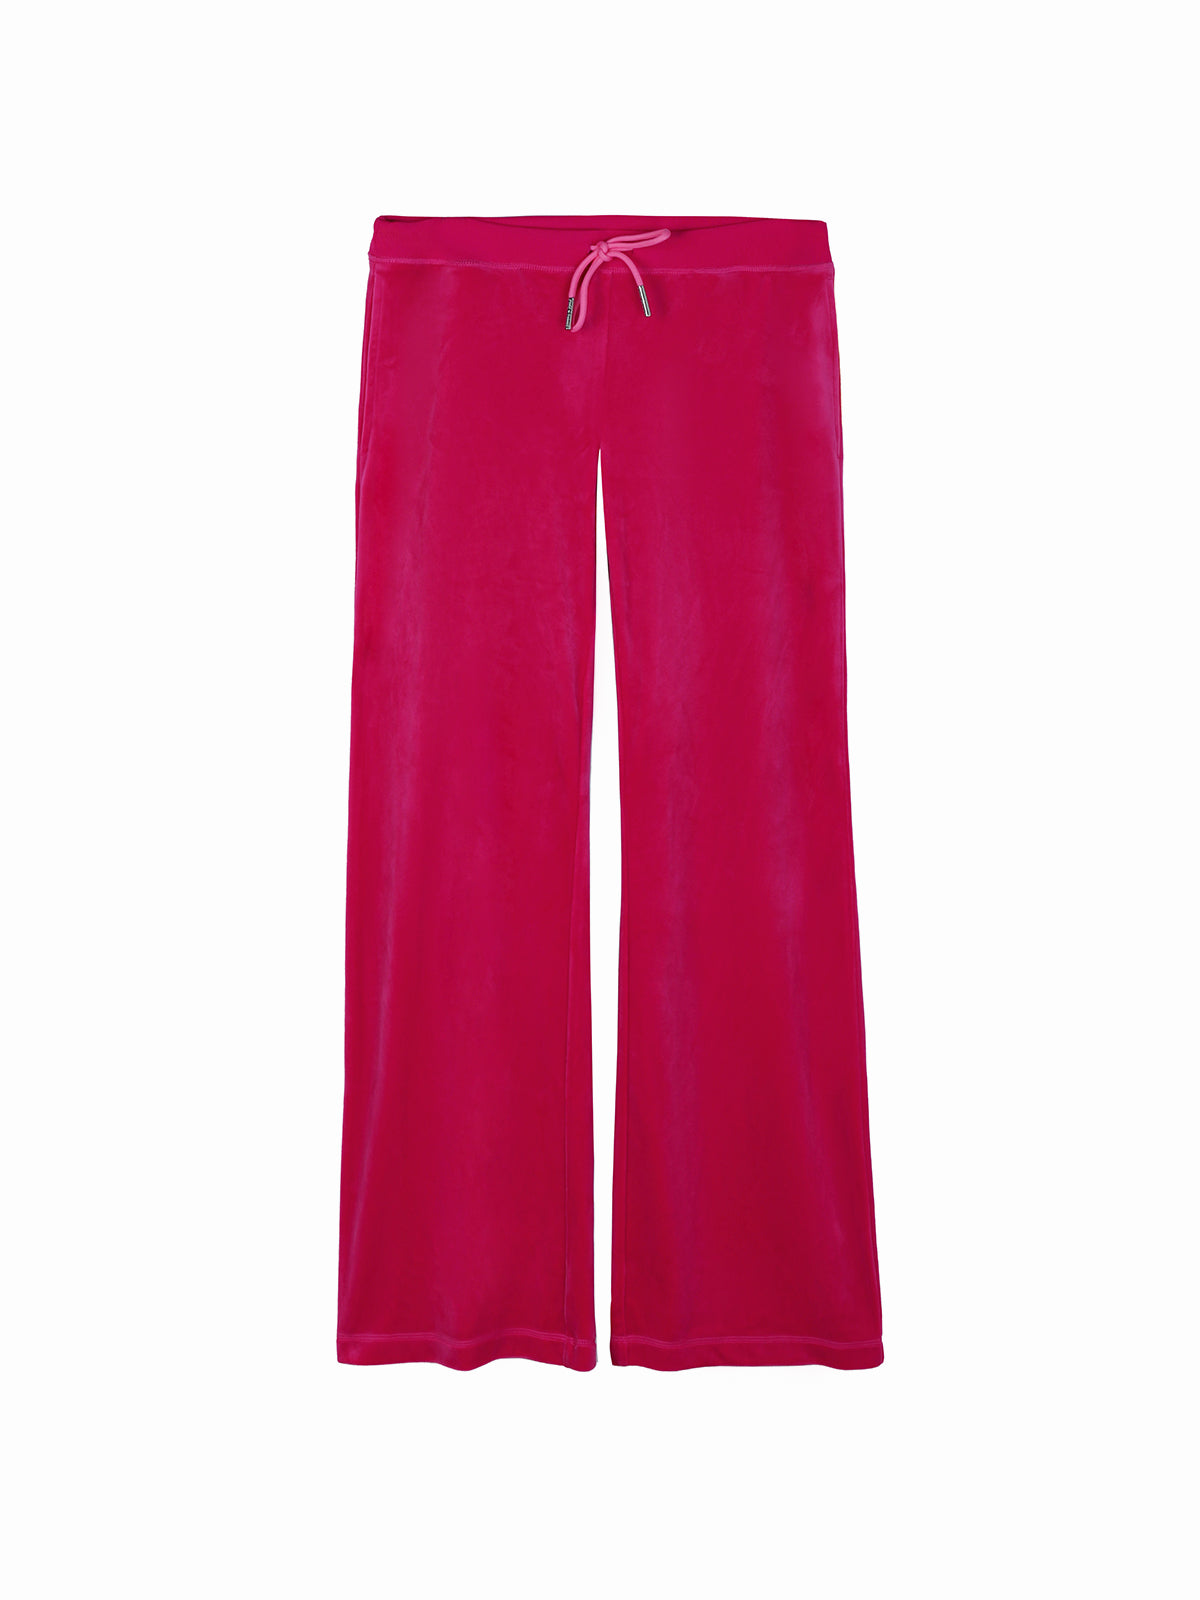 Juicy Couture Logoembroidered Straightleg Velour Trousers In Raven378   ModeSens